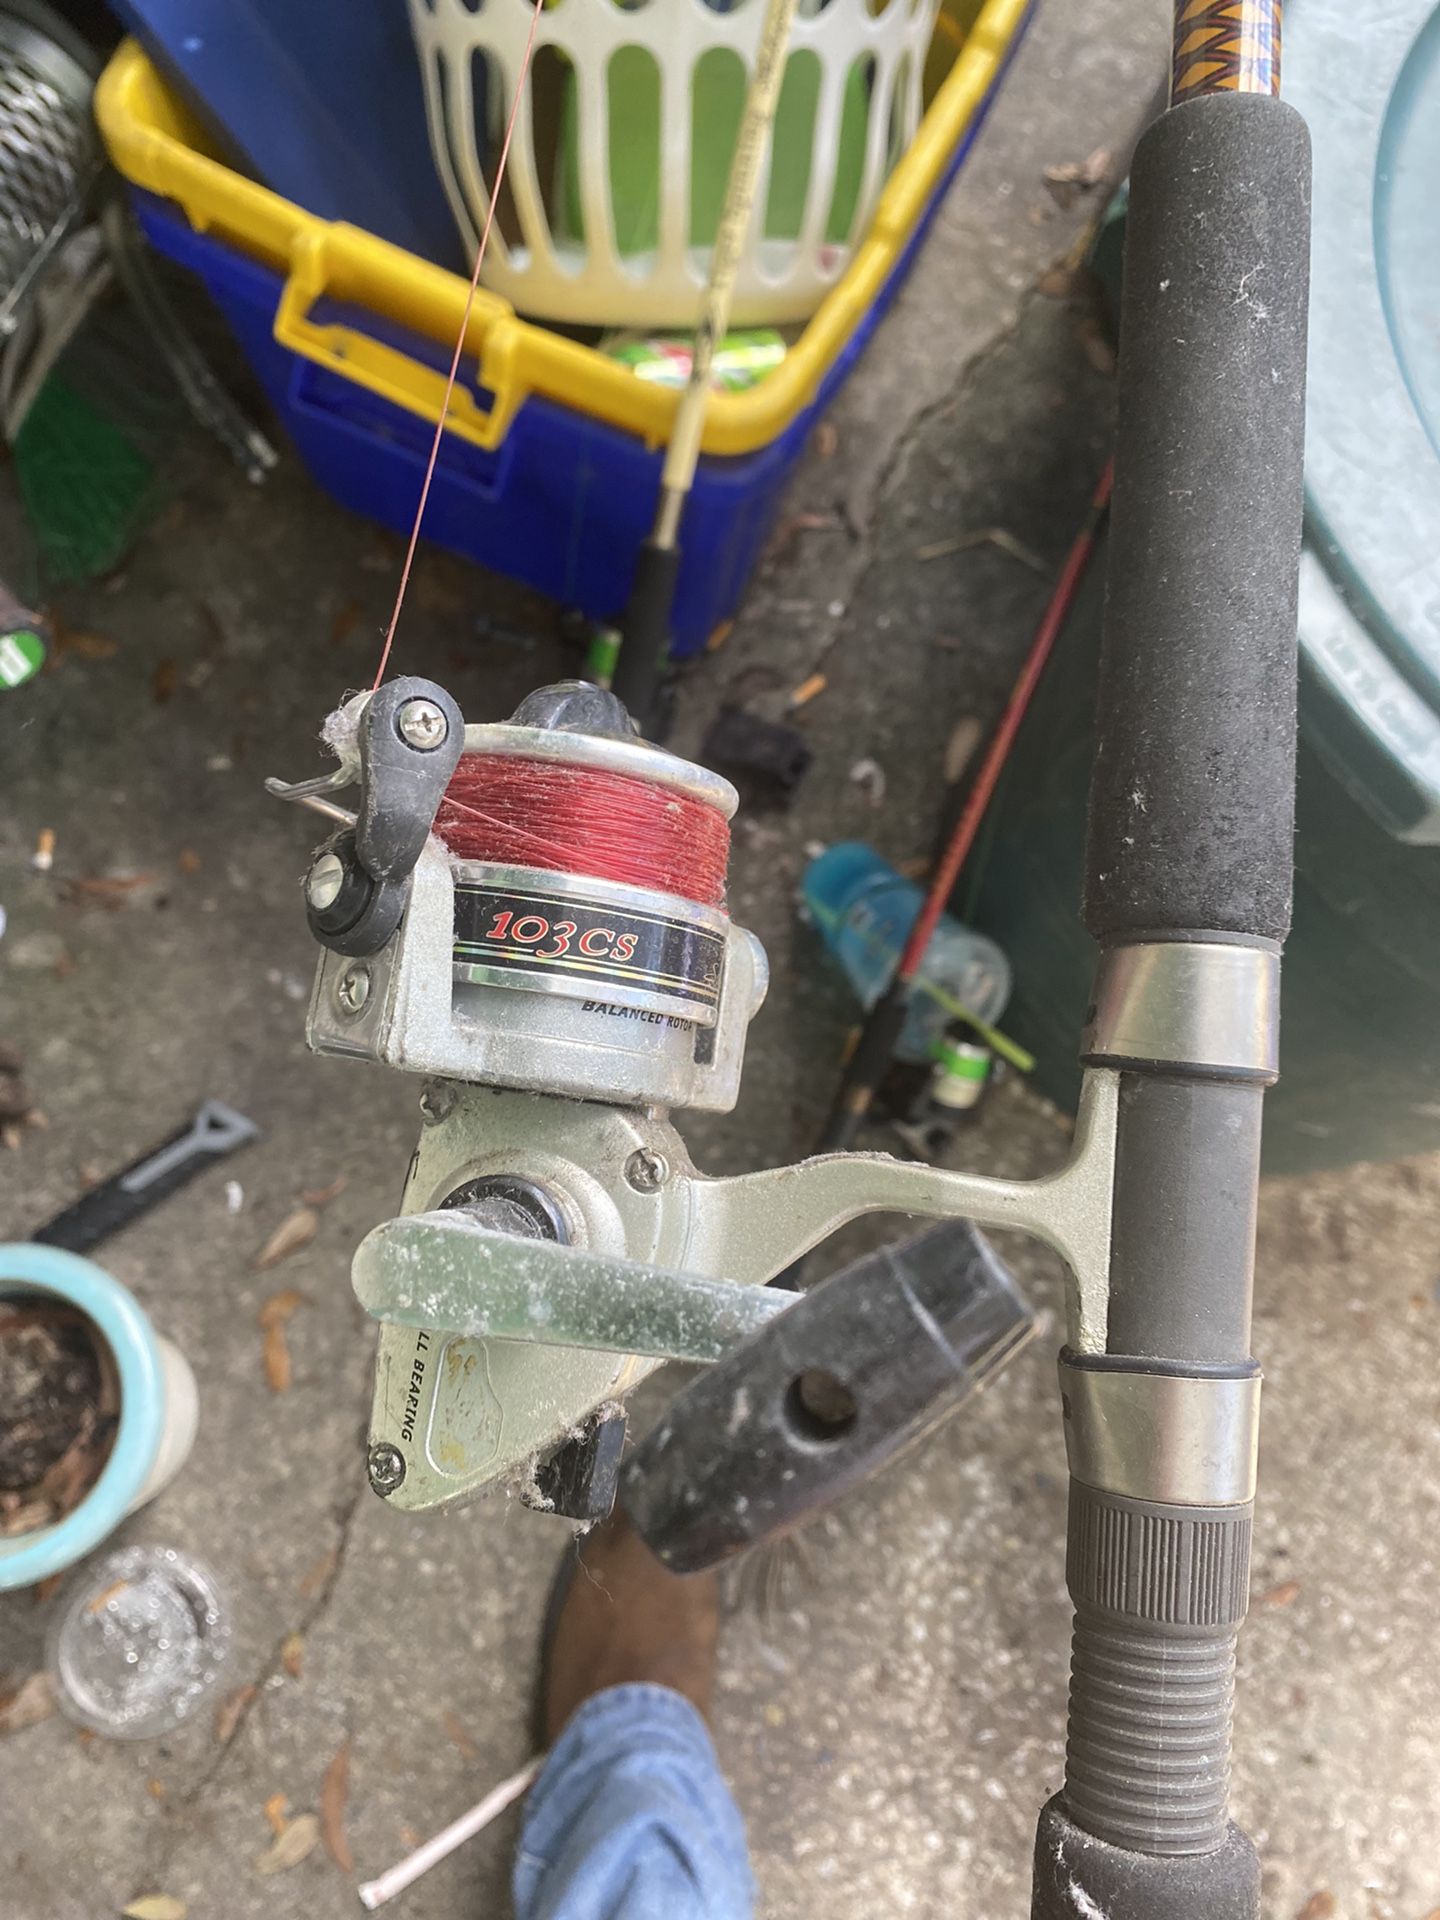 Penn 103 CS Reel With New 7’ Ugly Stick Rod